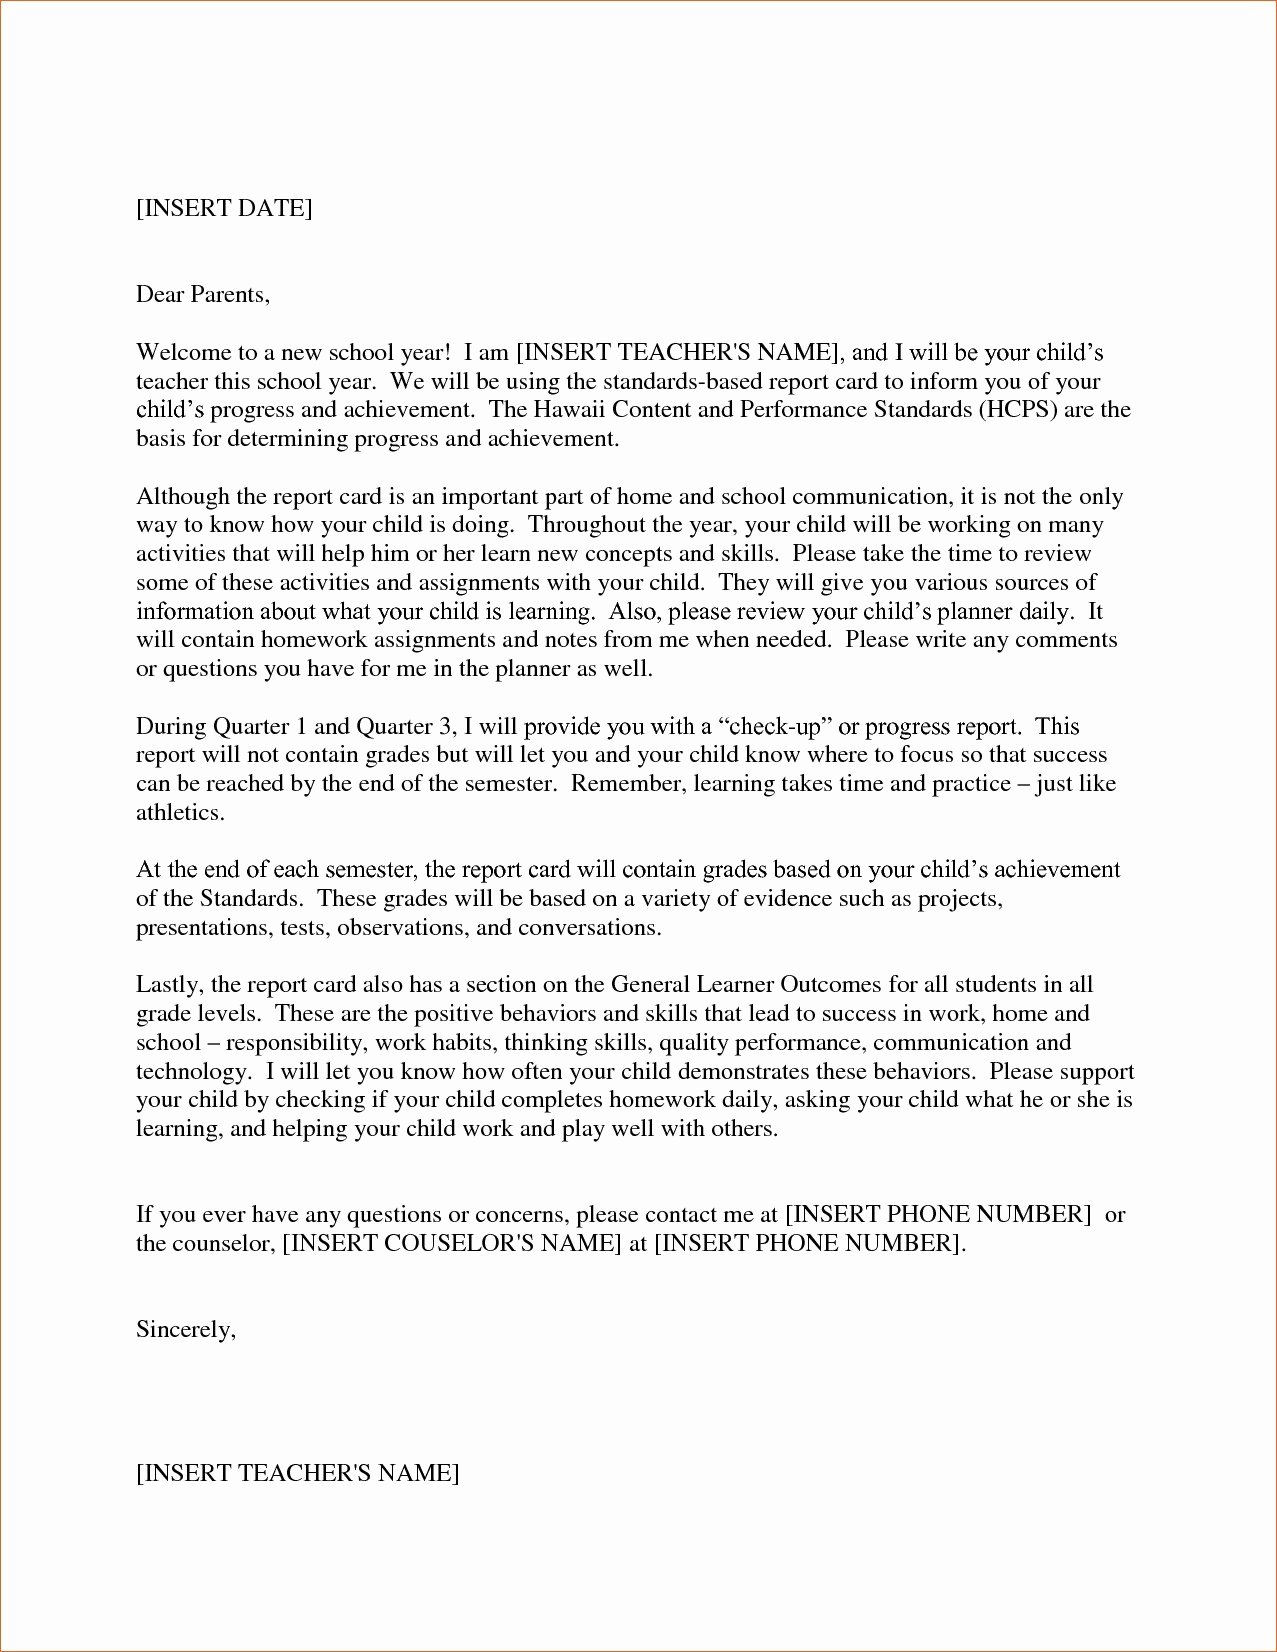 Letters to Parents Template Lovely Teacher Wel E Letter to Parents Template Samples